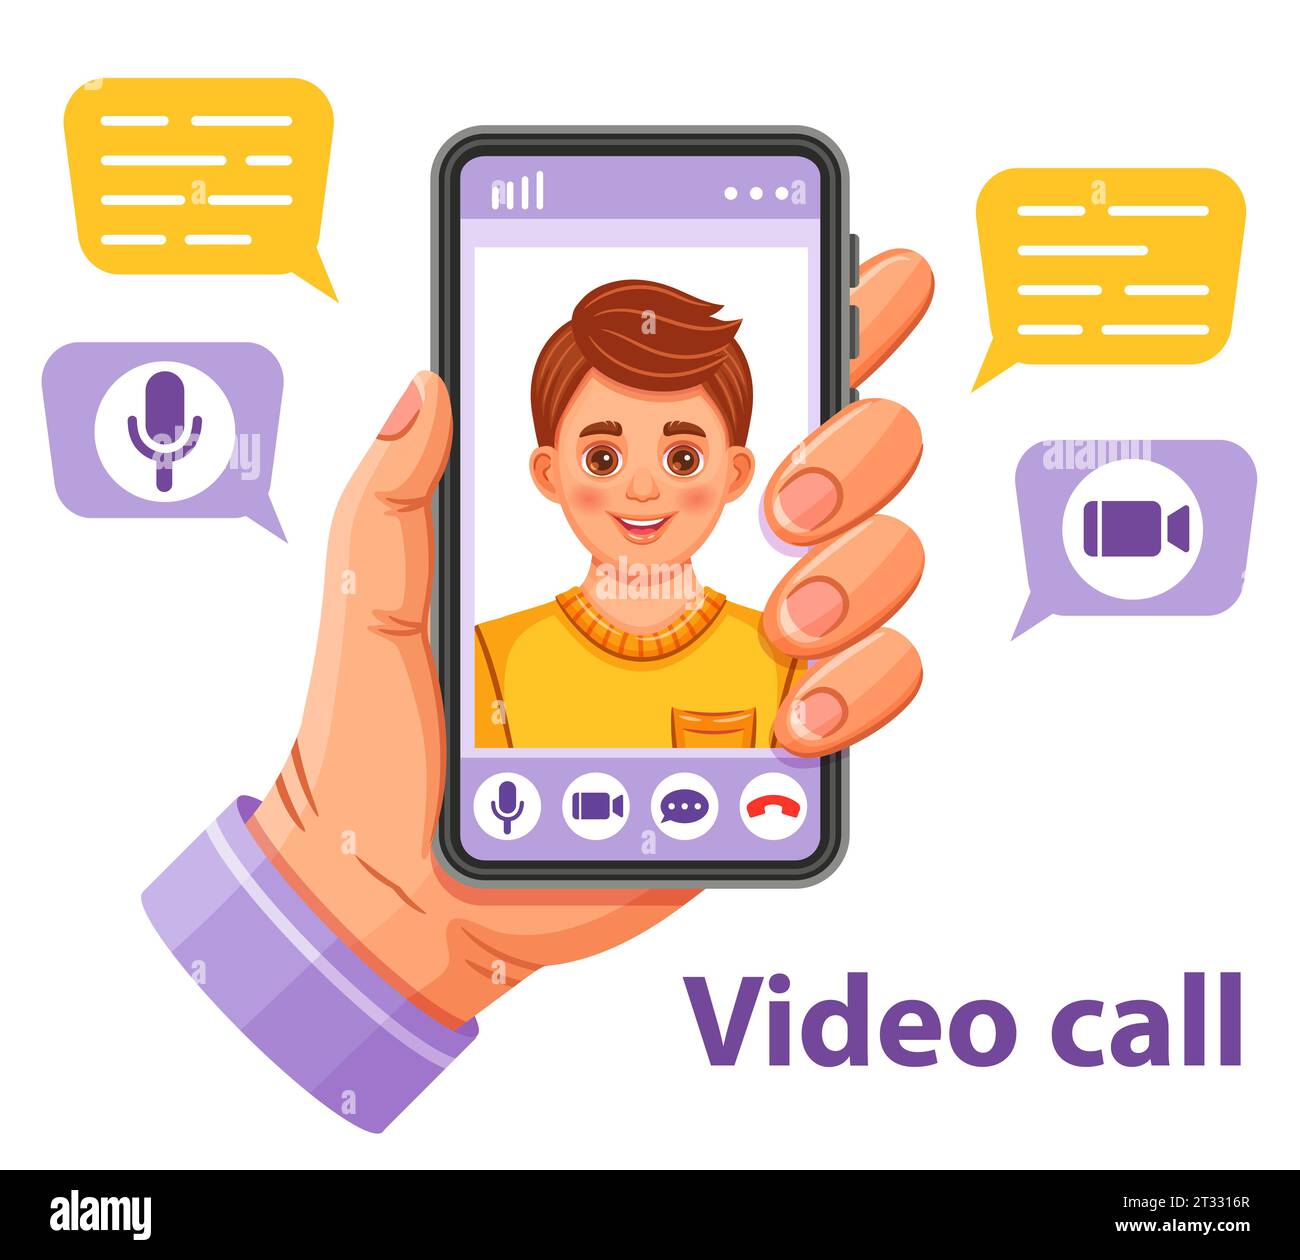 Video call between friends, chatting online by mobile app. Stay at home,  work, communication remotely. Hand holding smartphone. Group of people on  device screen. Internet messenger vector illustration Stock Vector